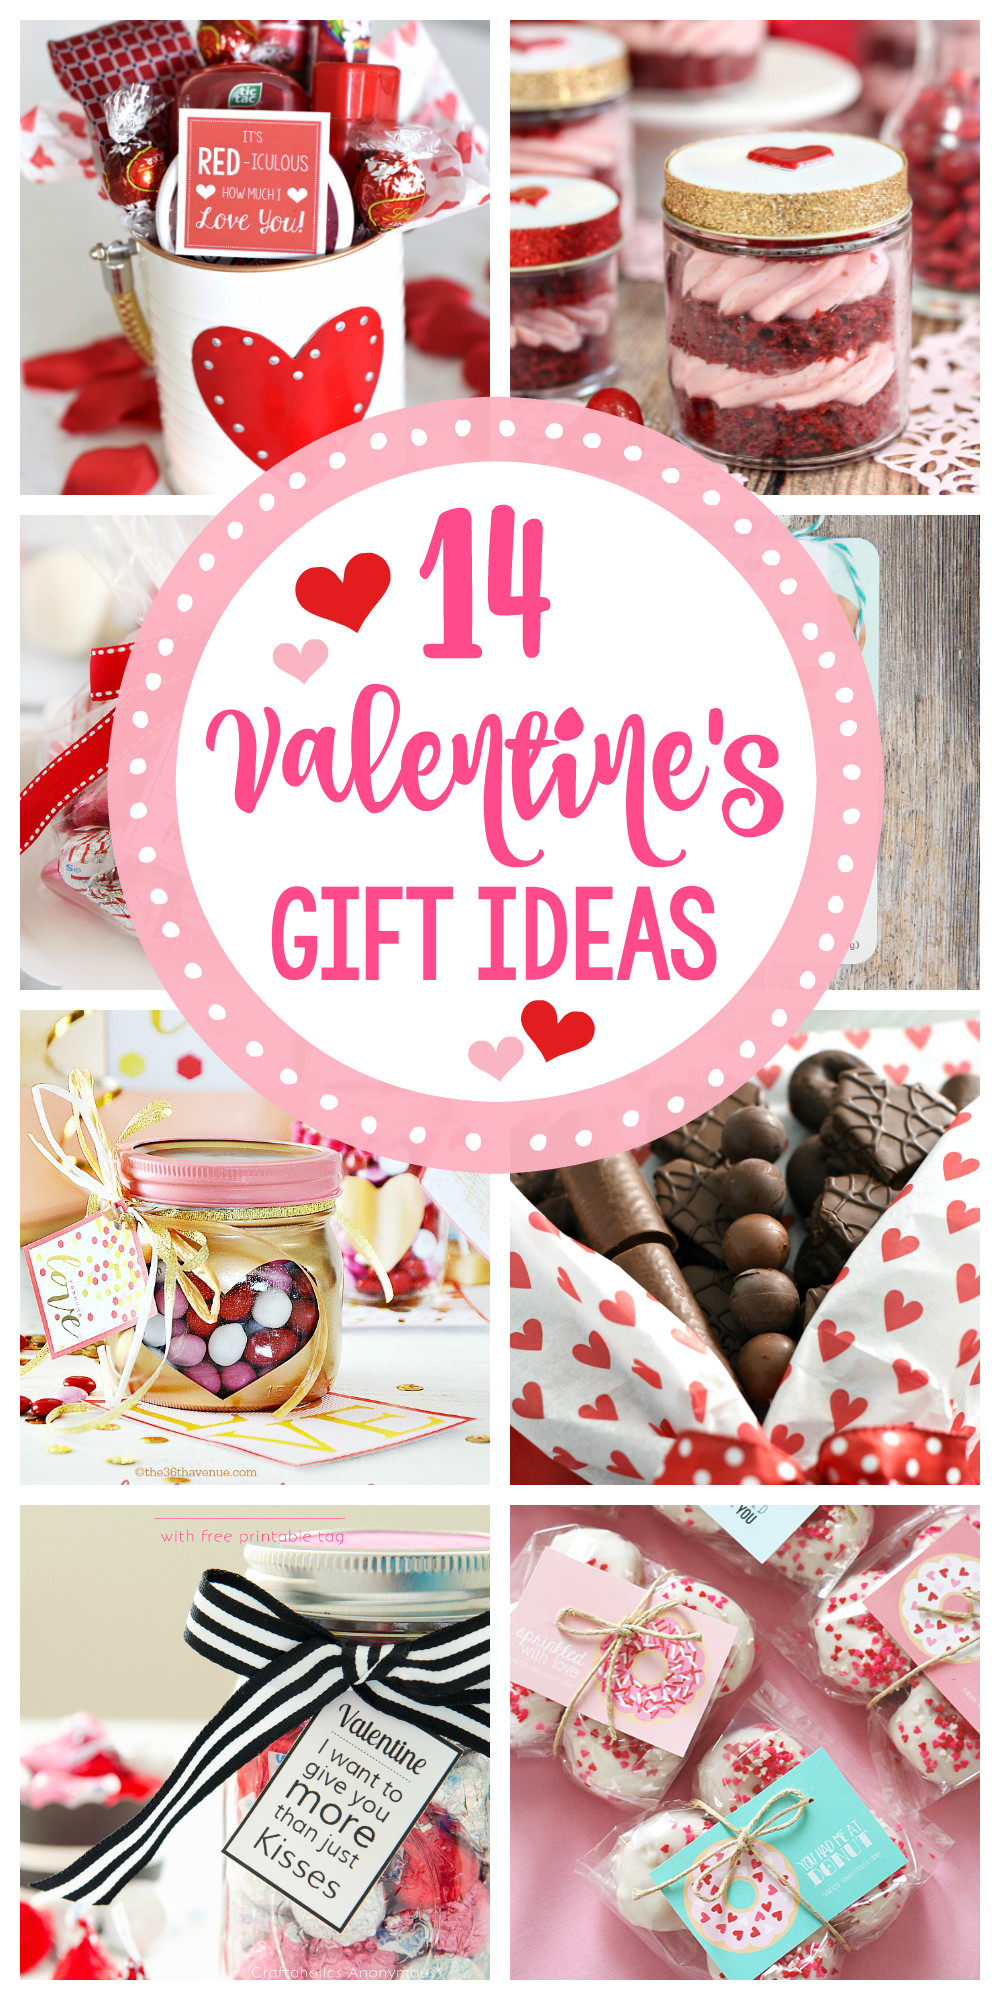 Valentines Gift Ideas For Her Pinterest
 14 Fun & Creative Valentine s Day Gift Ideas – Fun Squared